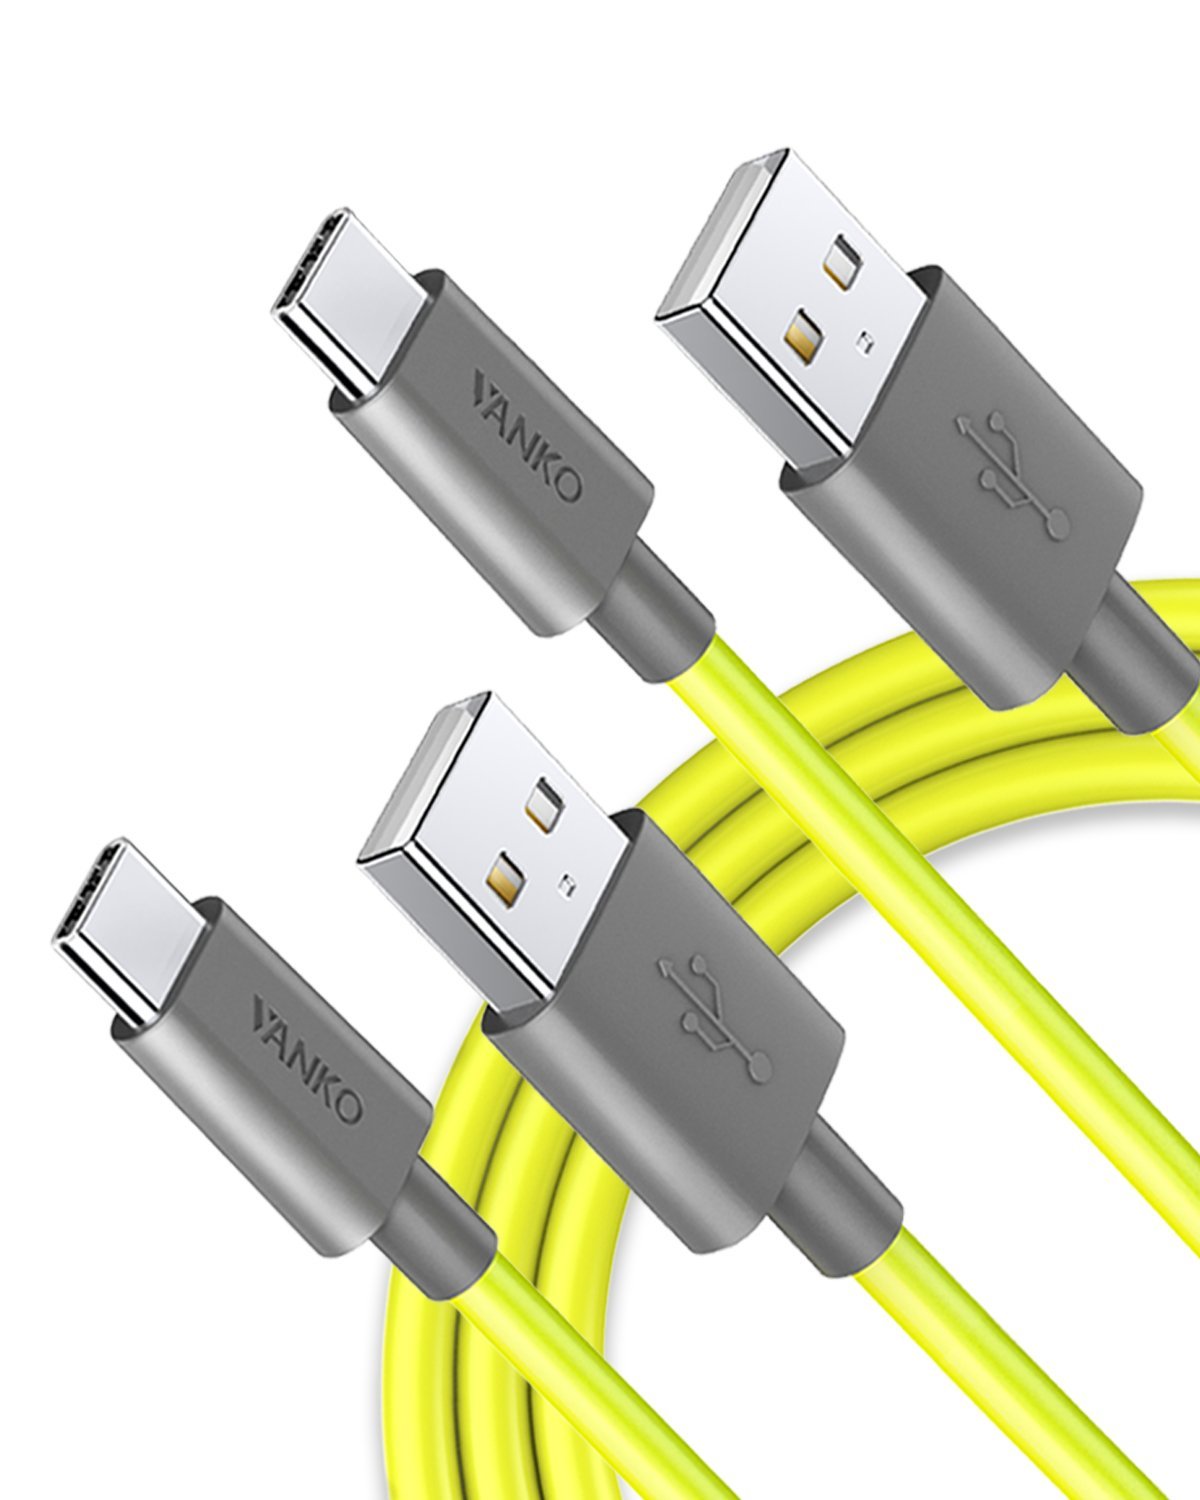 Кабель USB Type c 8a Realme. Кабель USB Micro fast Charging 4.0. USB Cable Type-c 2pack. Кабель USB Type c Samsung в упаковке 2шт. Кабели fast charge